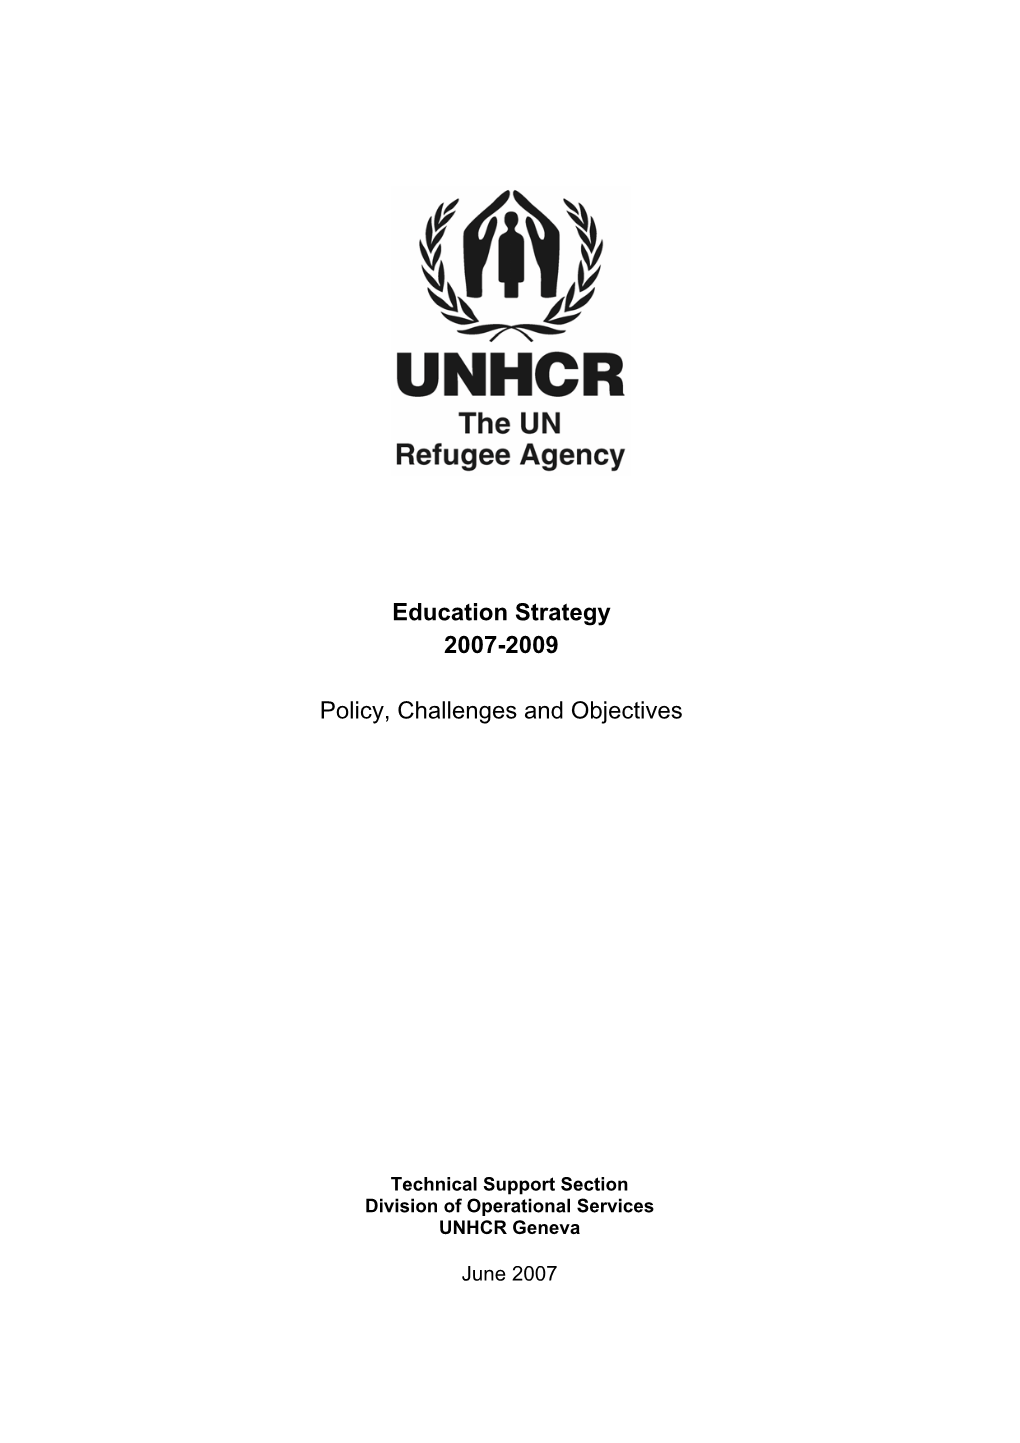 Outline of Education Strategy 2006